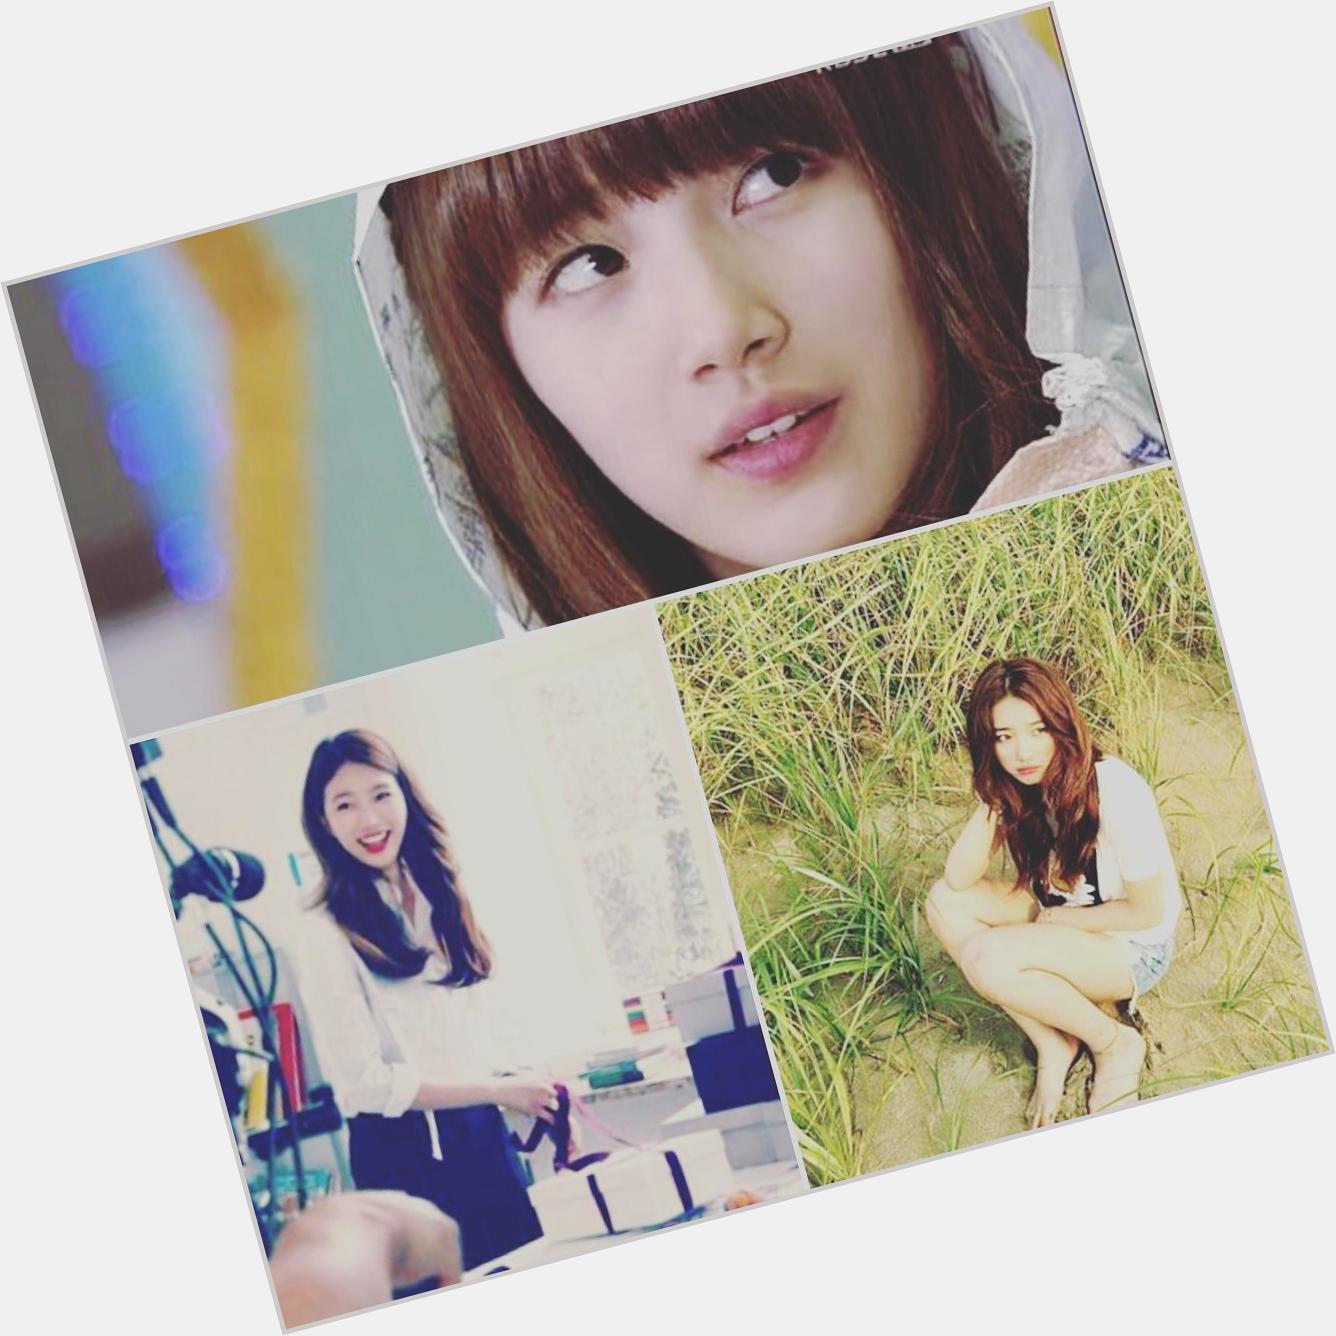 HAPPY BIRTHDAY BAE suzy u will forever be my UB the girl who brought me into kpop my Go HyeMi ILY 